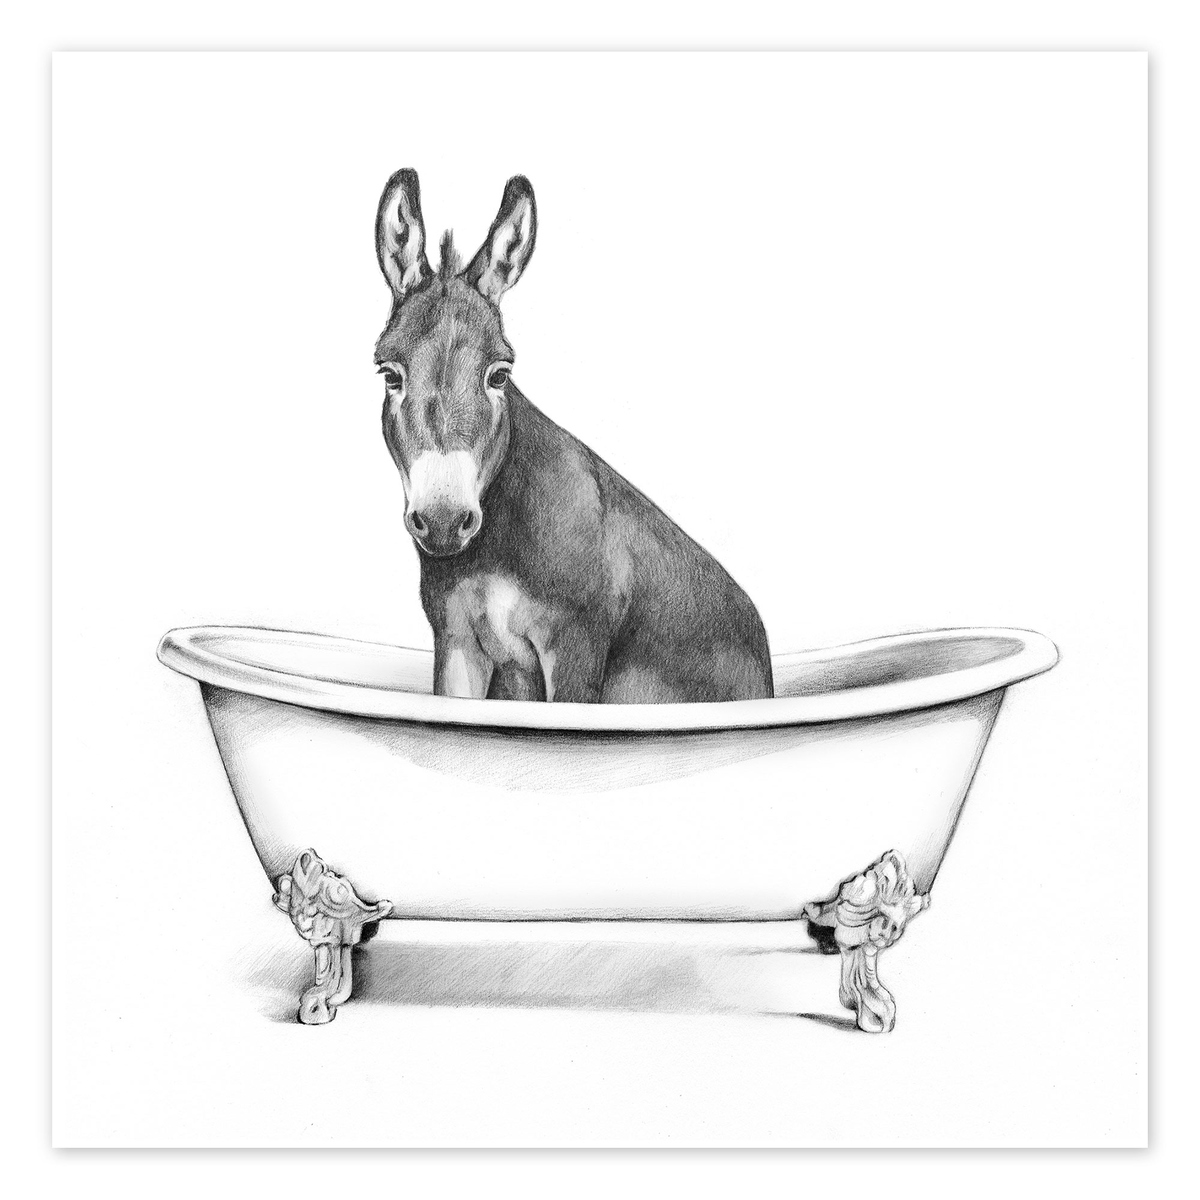 Where Is It Illegal To Have A Donkey In Your Bathtub